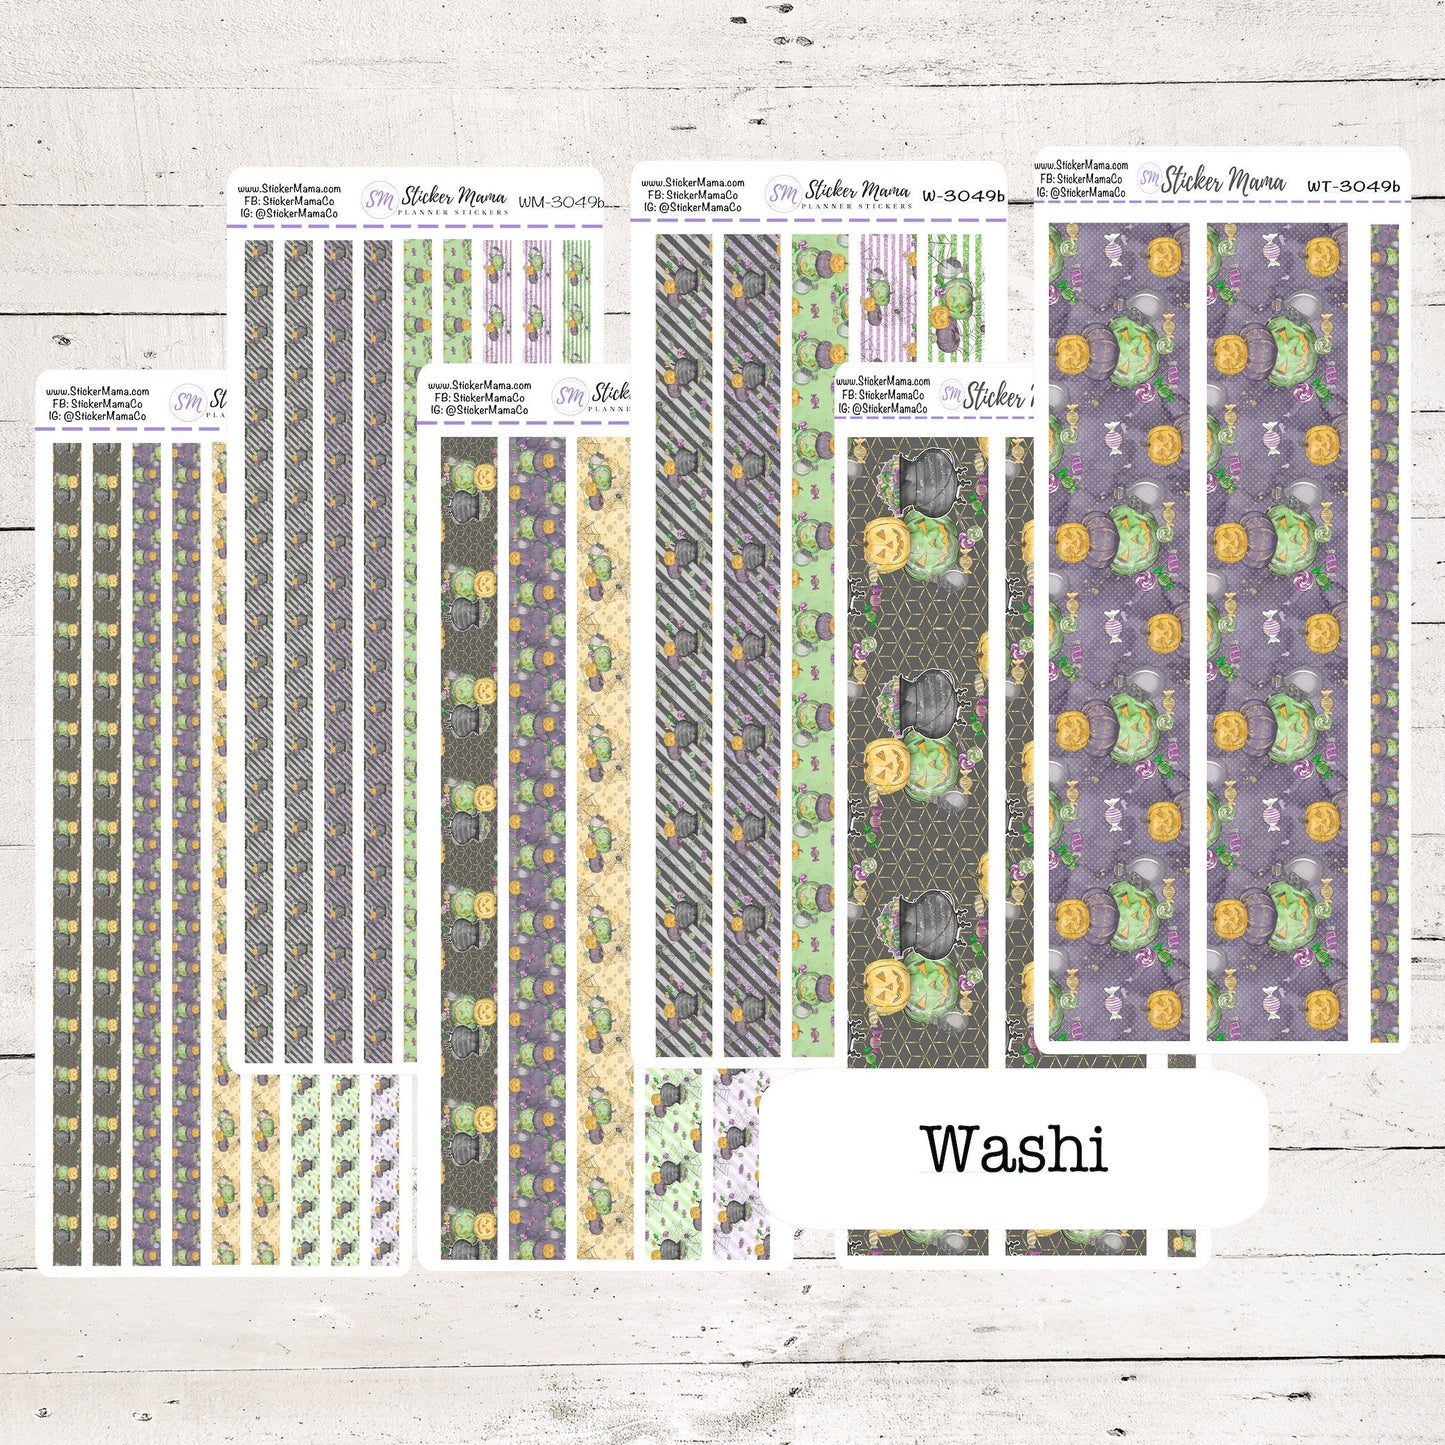 W-3049- WASHI STICKERS - Halloween - Planner Stickers - Washi for Planners